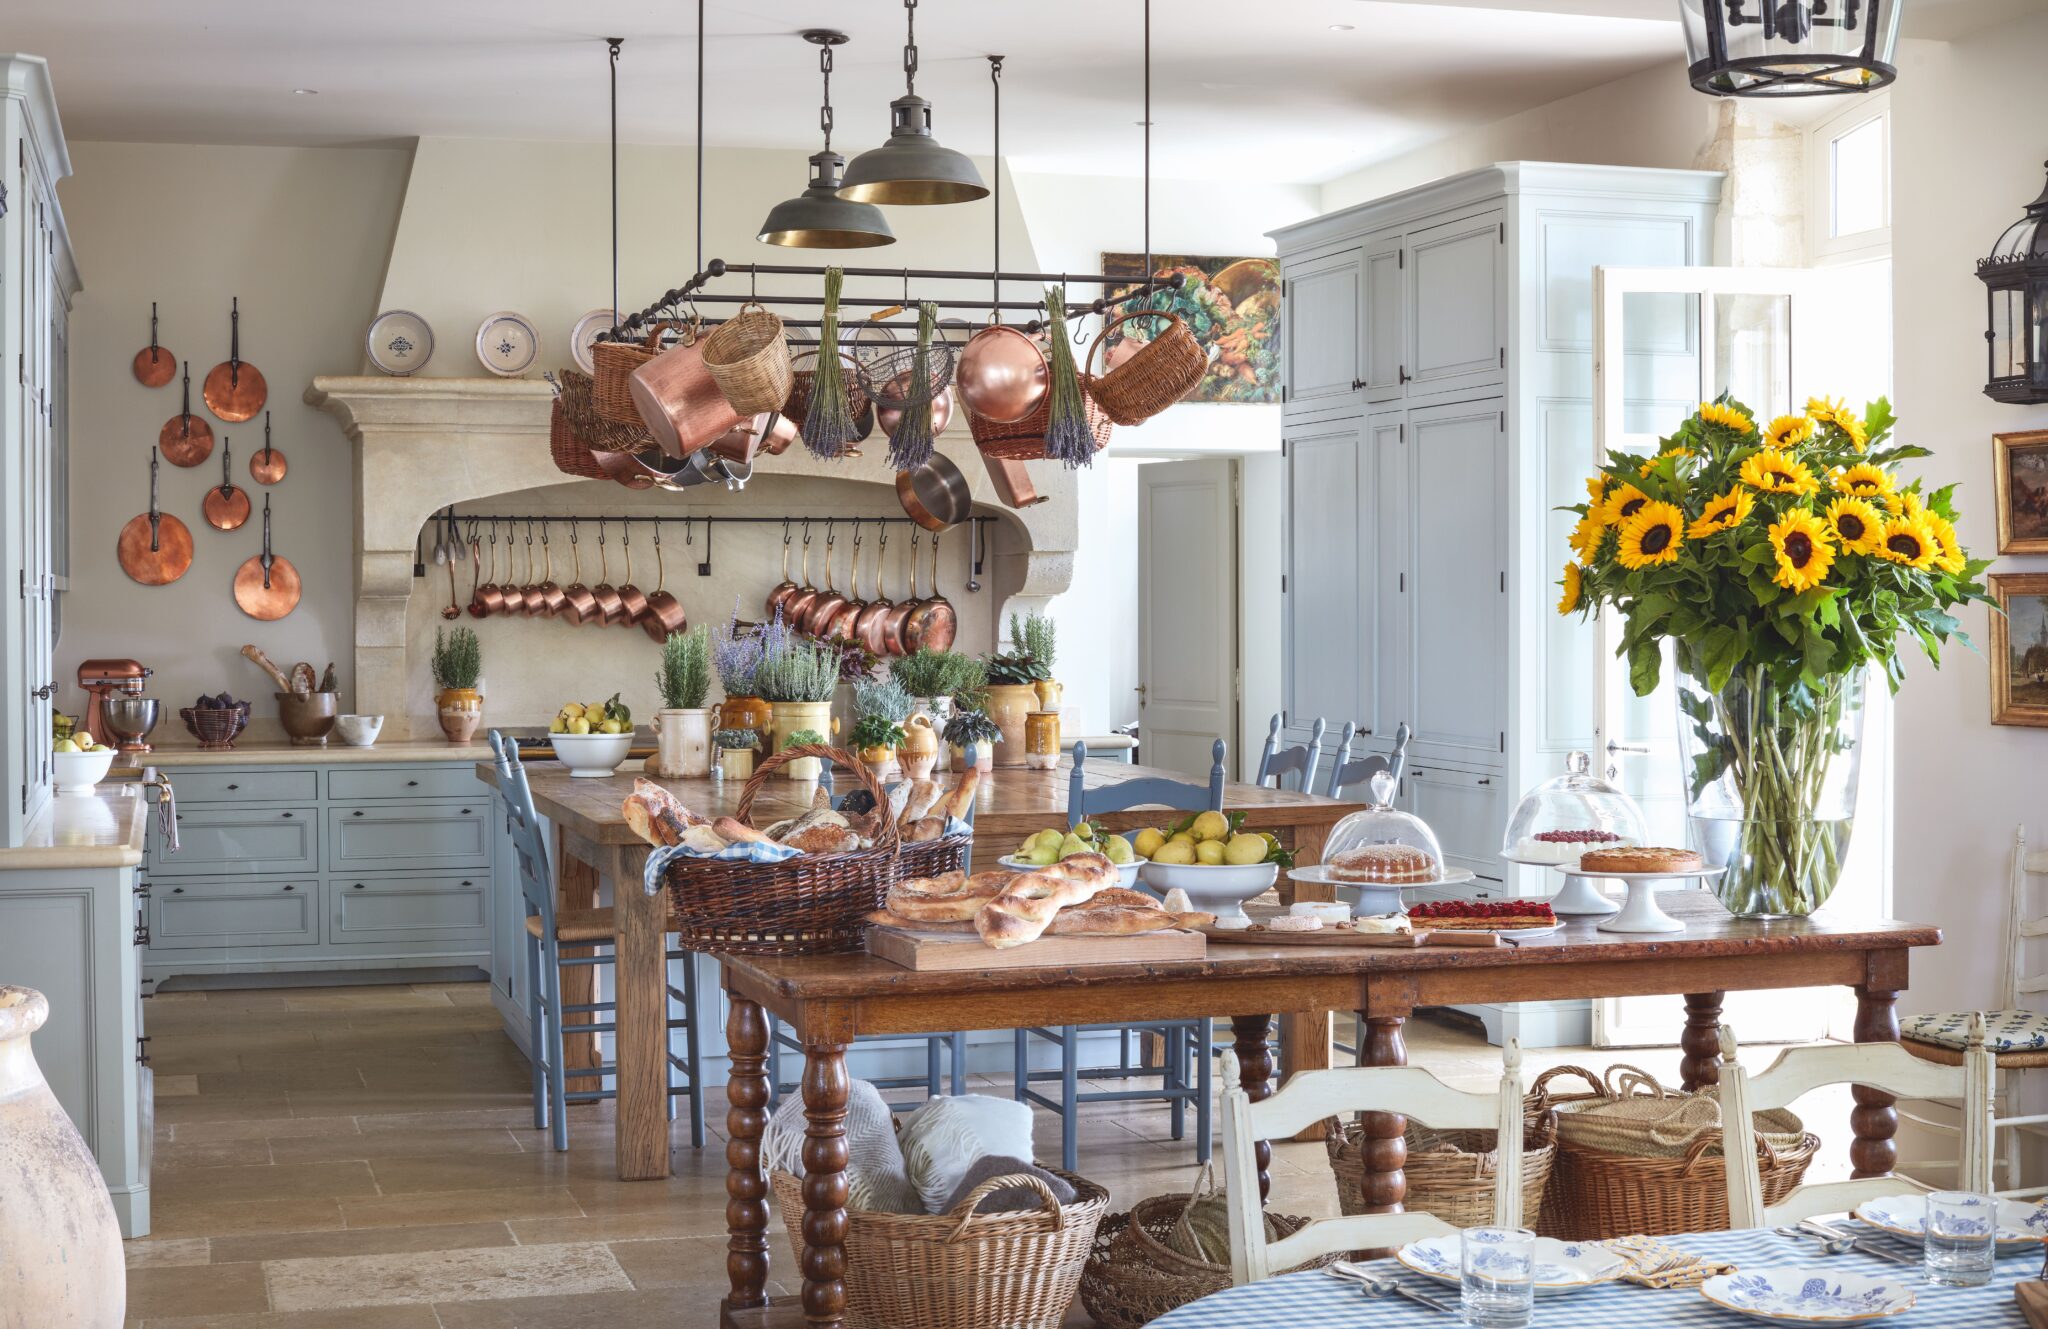 Provencal Dreams: The Beauty Of French Countryside Decor